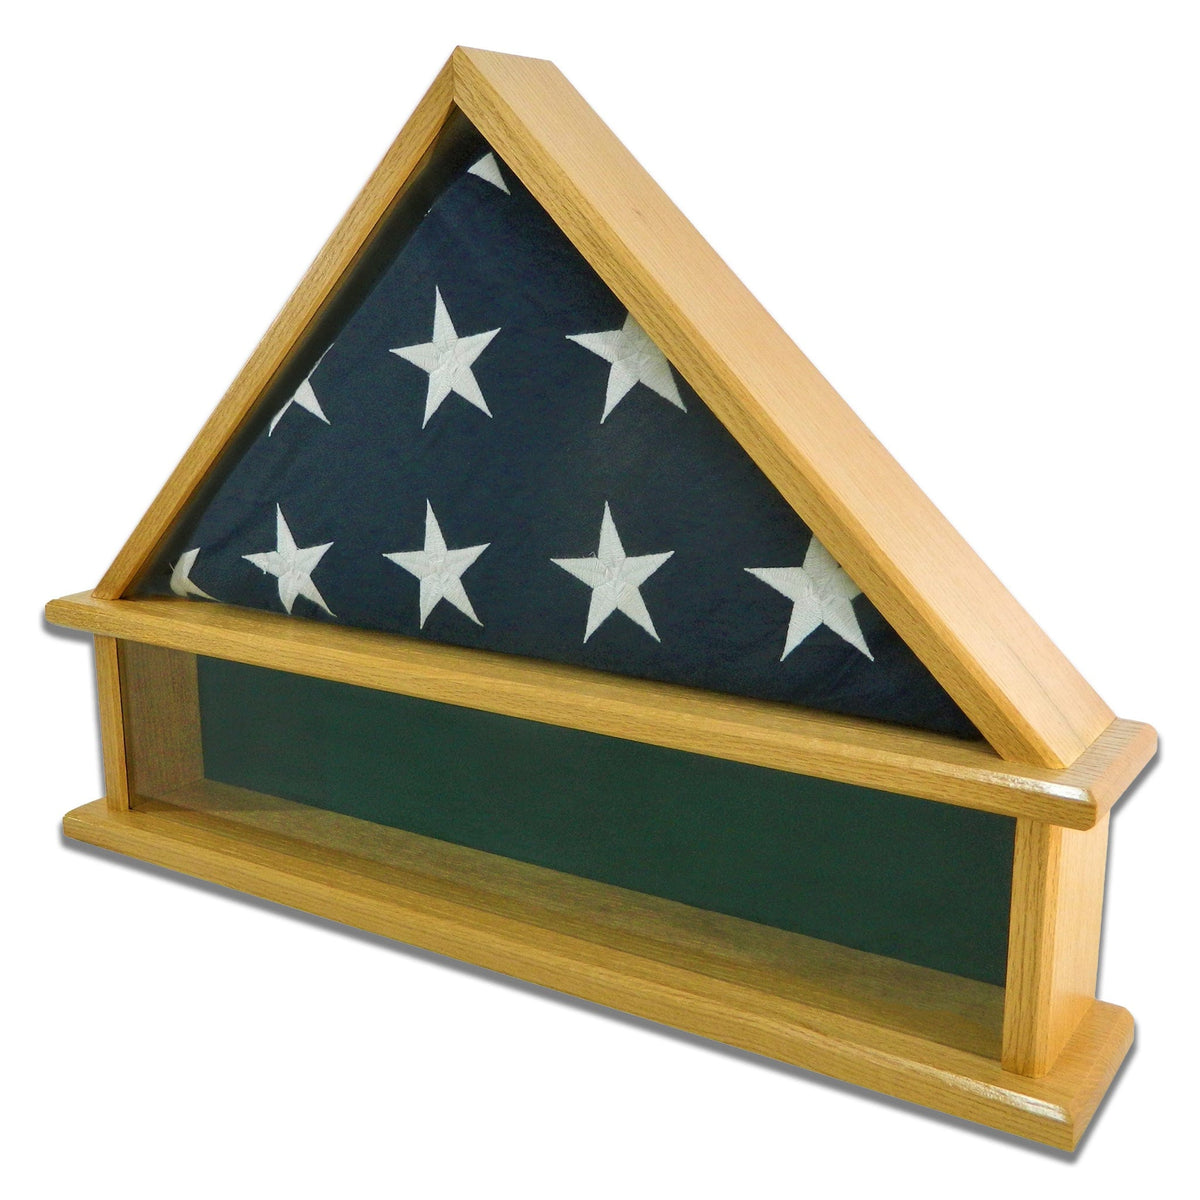 Oak Burial Flag Display Case with shadow box section for the base. Holds a 5'x9.5' Burial Flag.